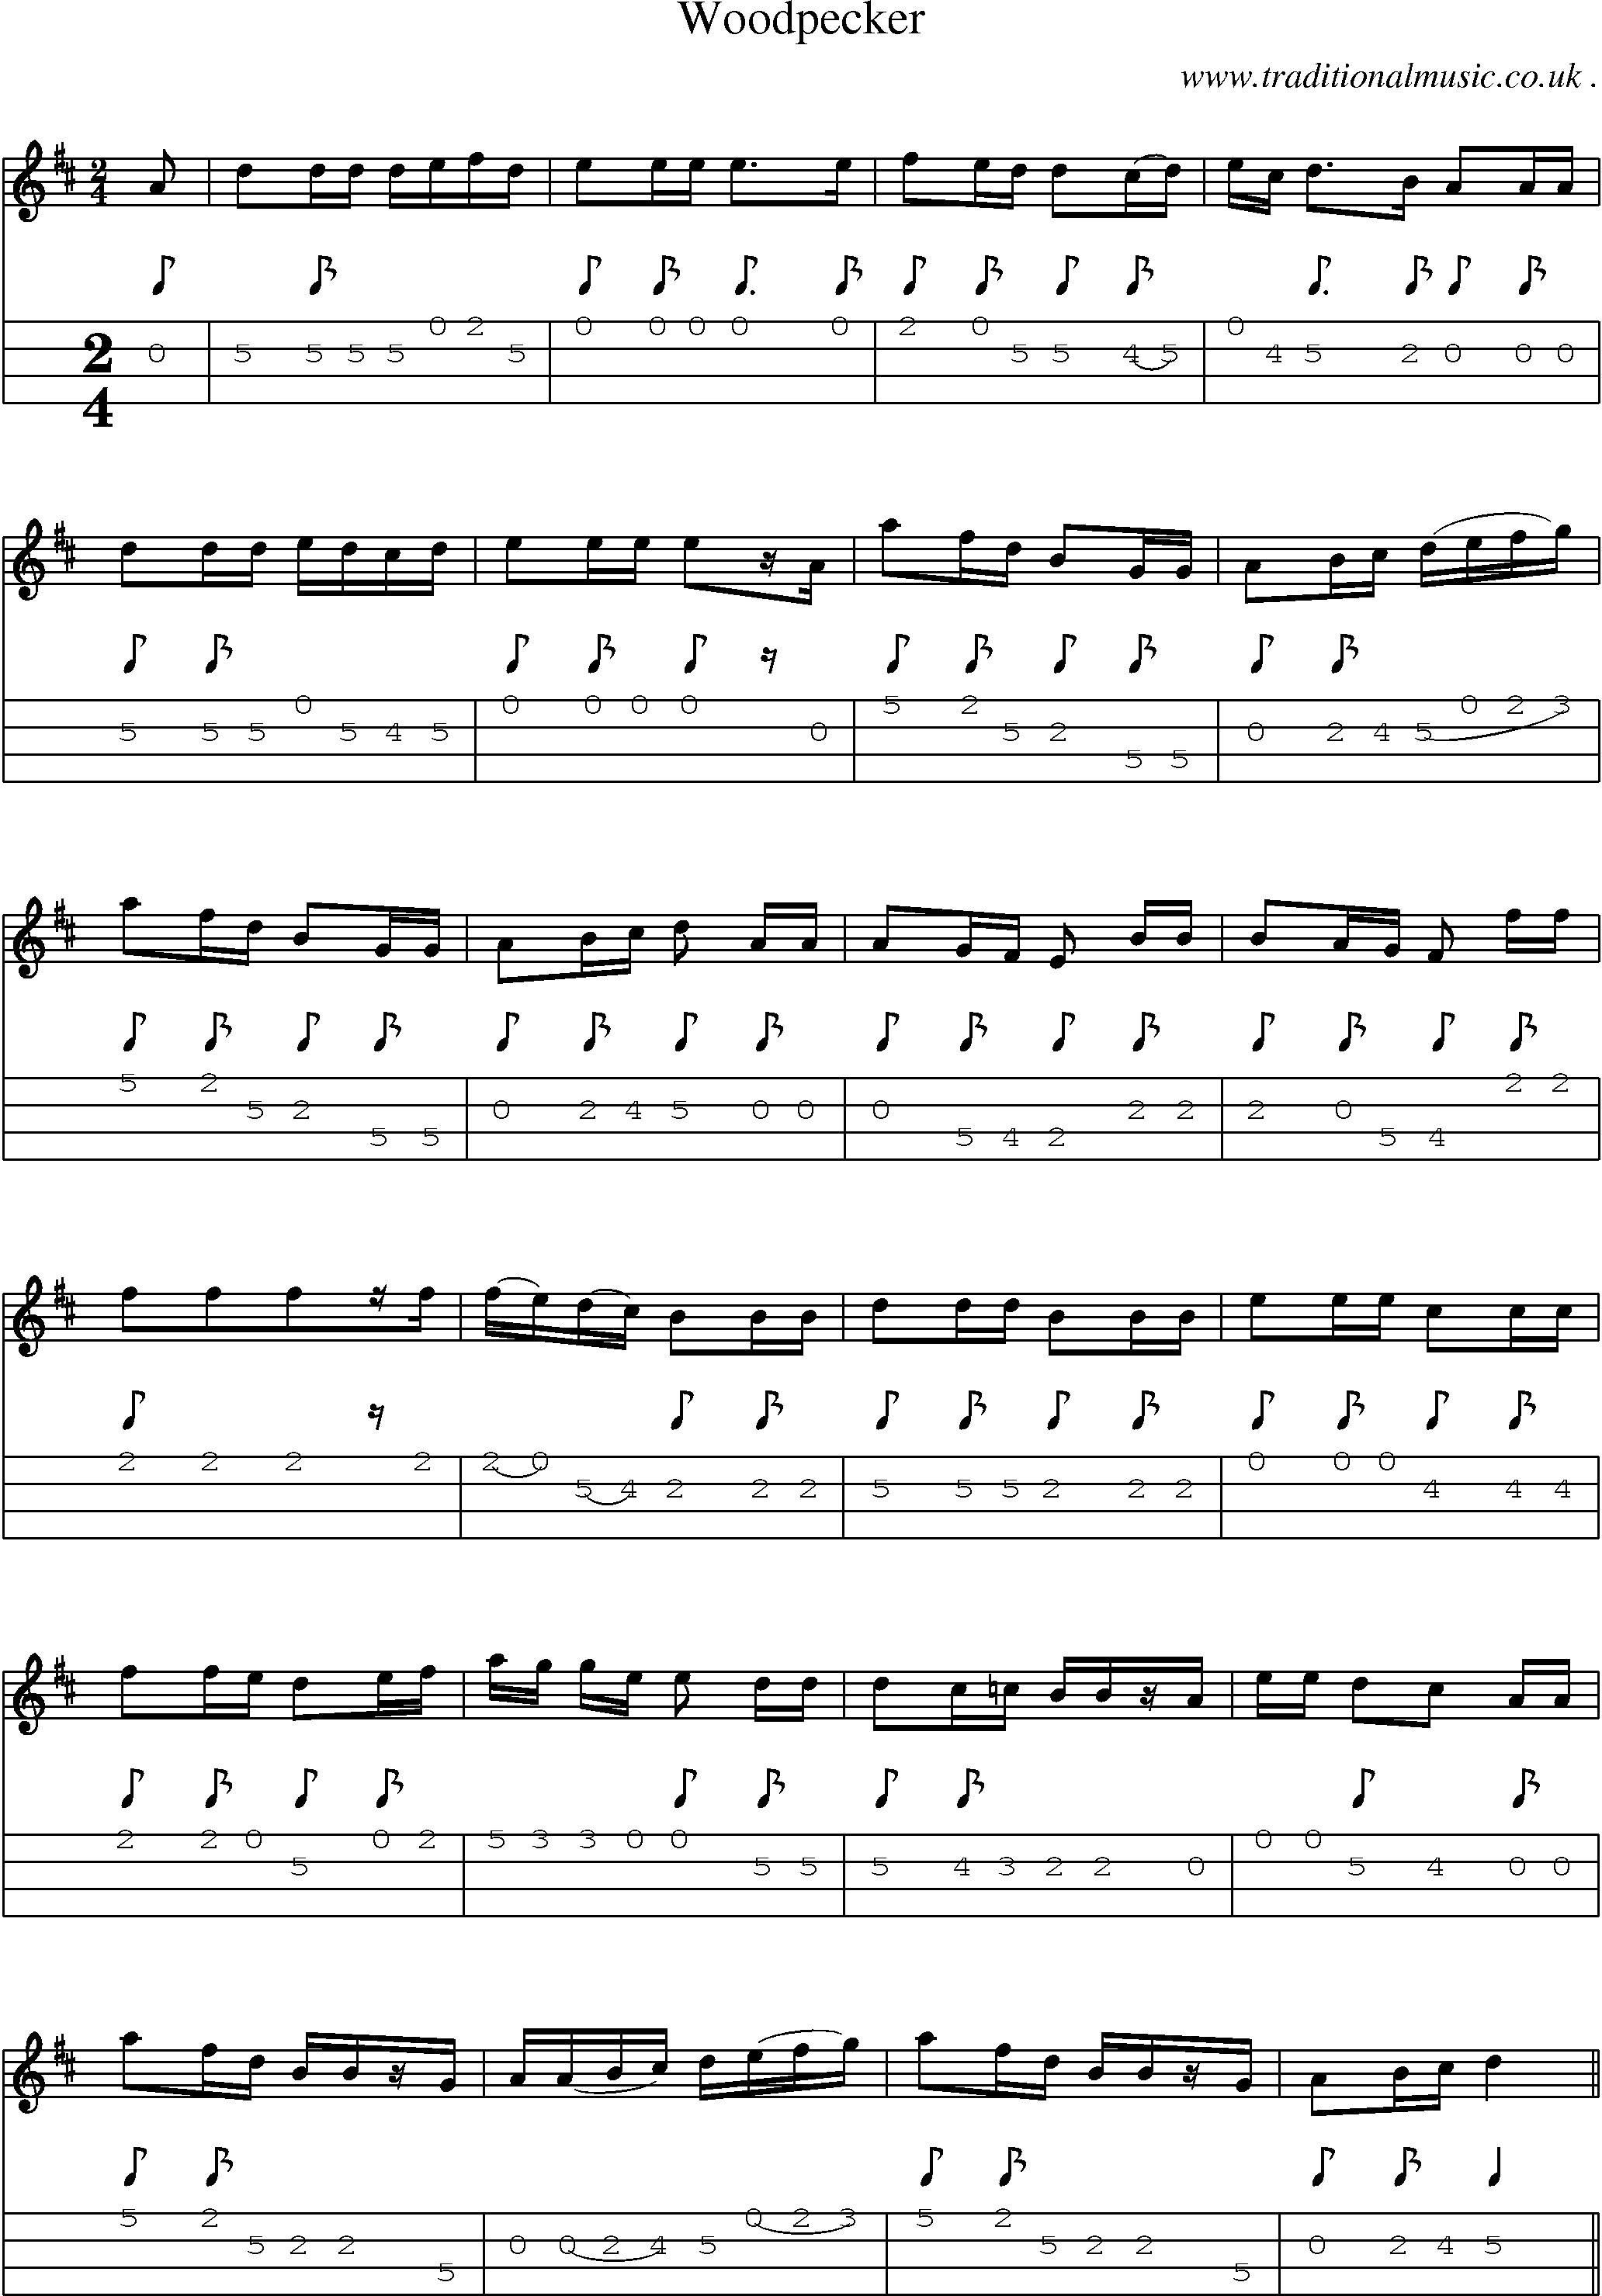 Sheet-Music and Mandolin Tabs for Woodpecker